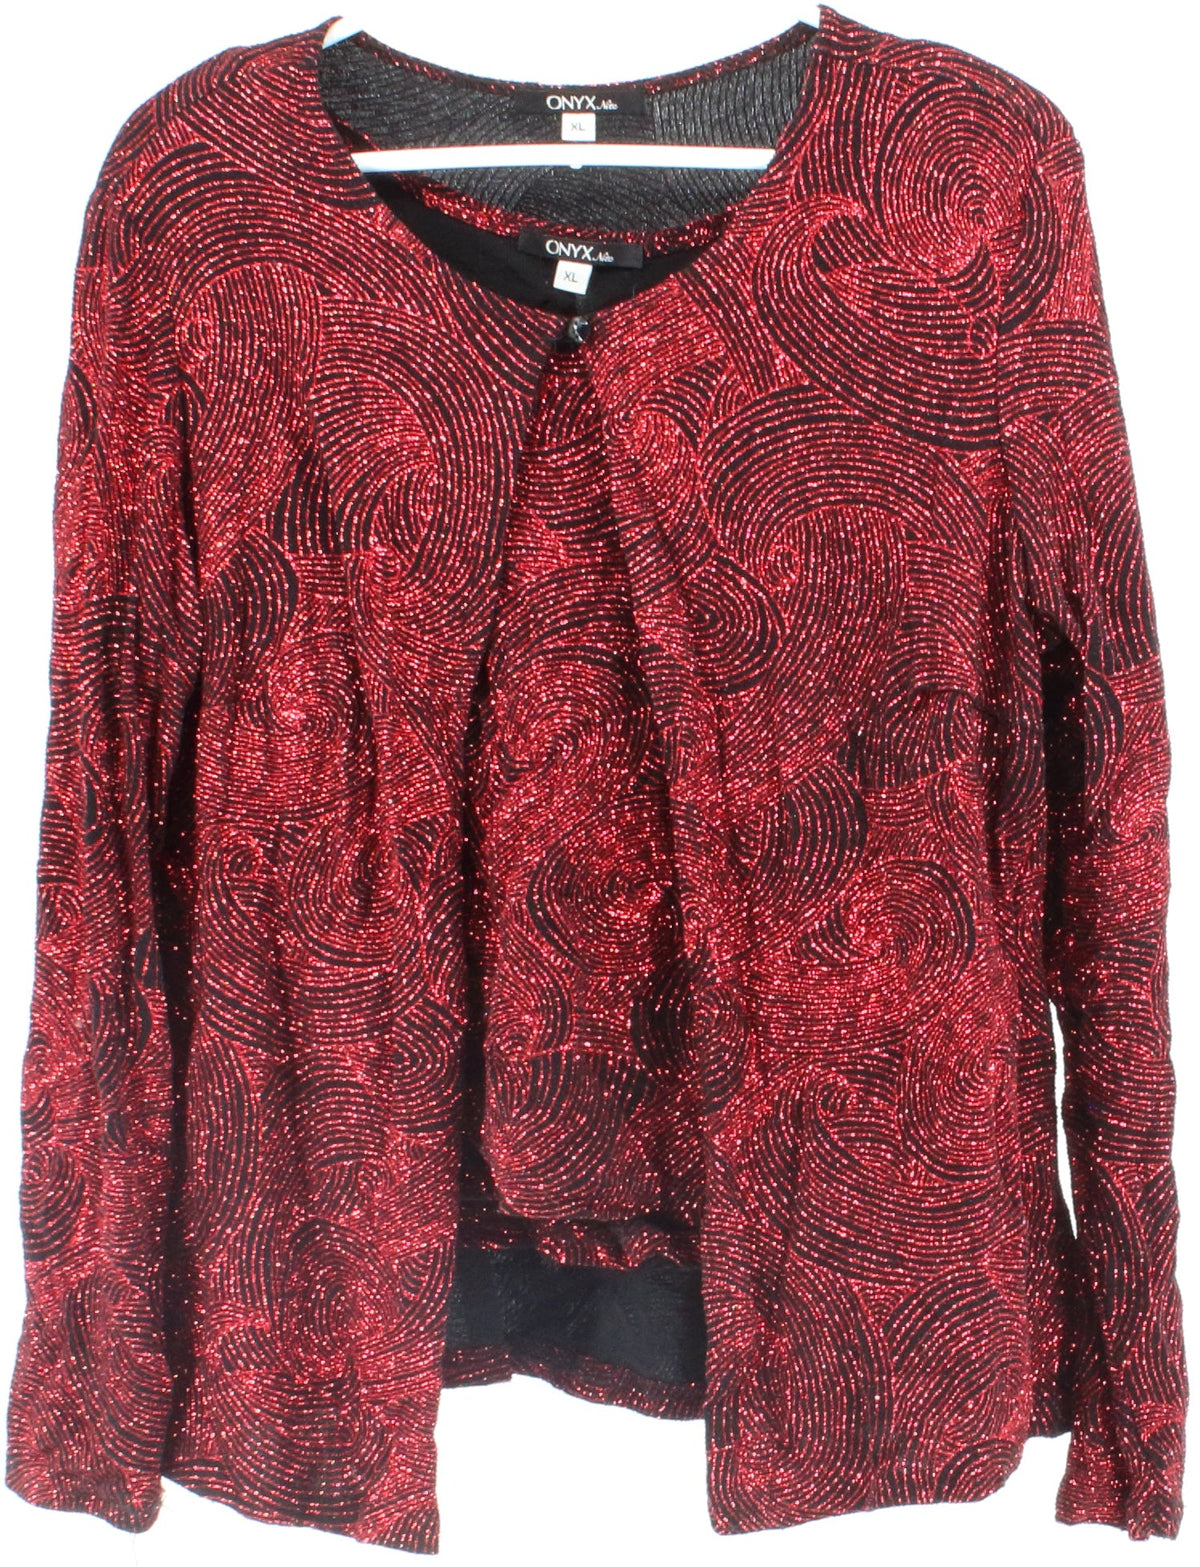 Onyx Nite Red Glitter Long Sleeve Open Front Twin Set Top